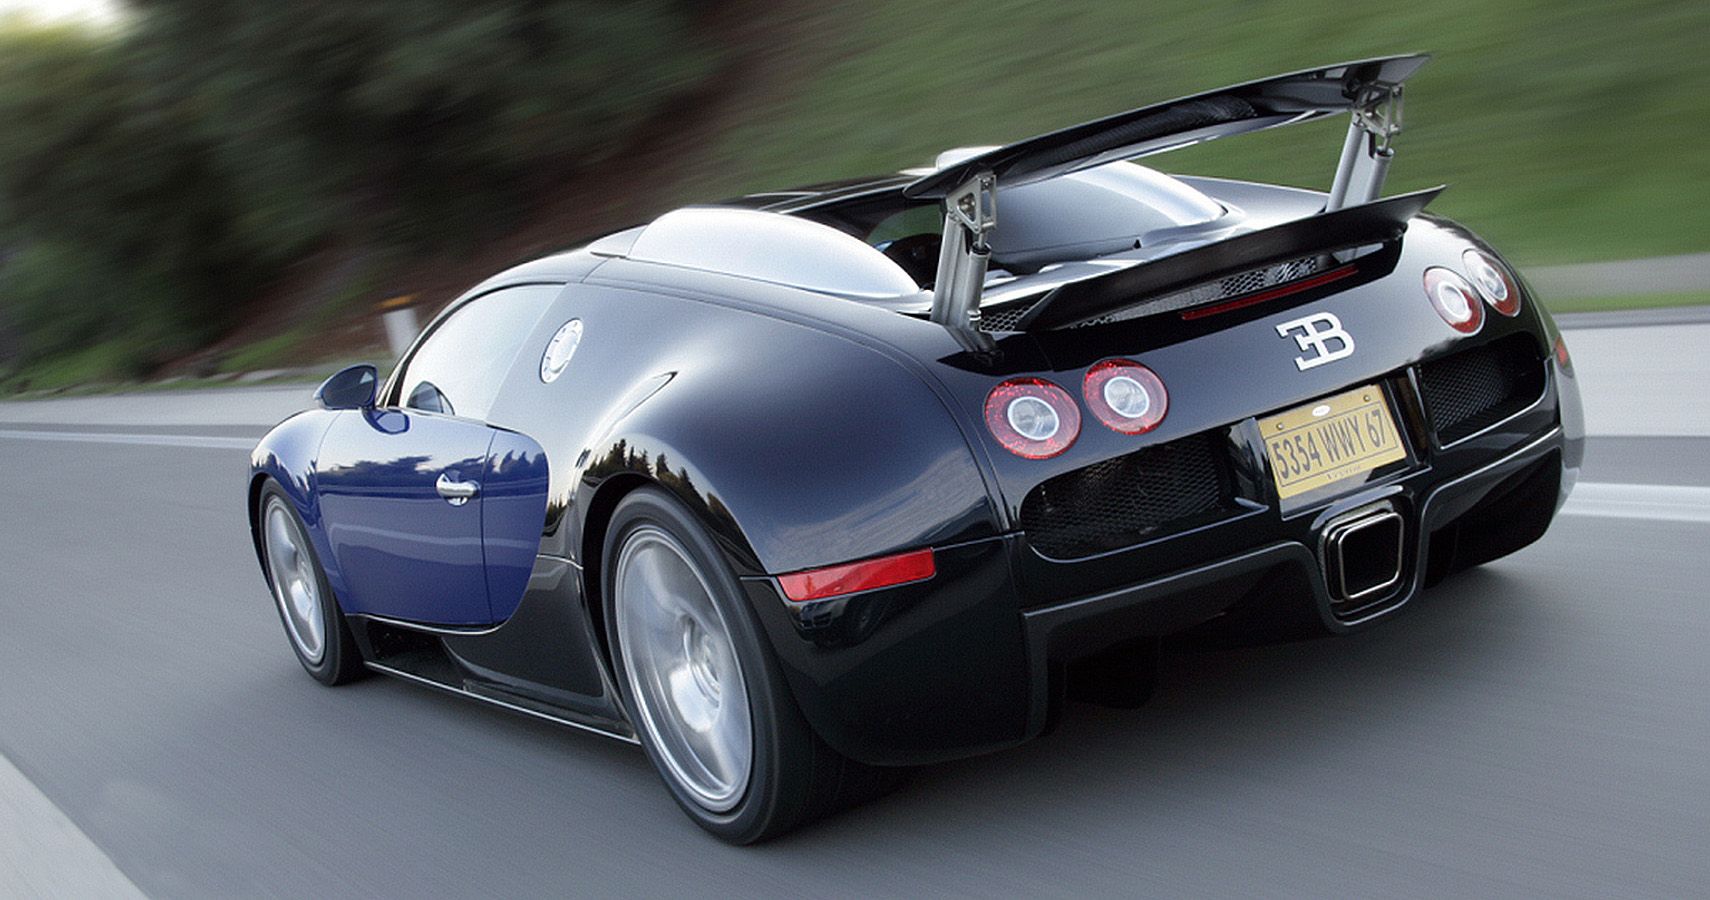 The 2005 Veyron Cost $1.24 Million… But The Actual Cost Of Owning One Was Much Higher